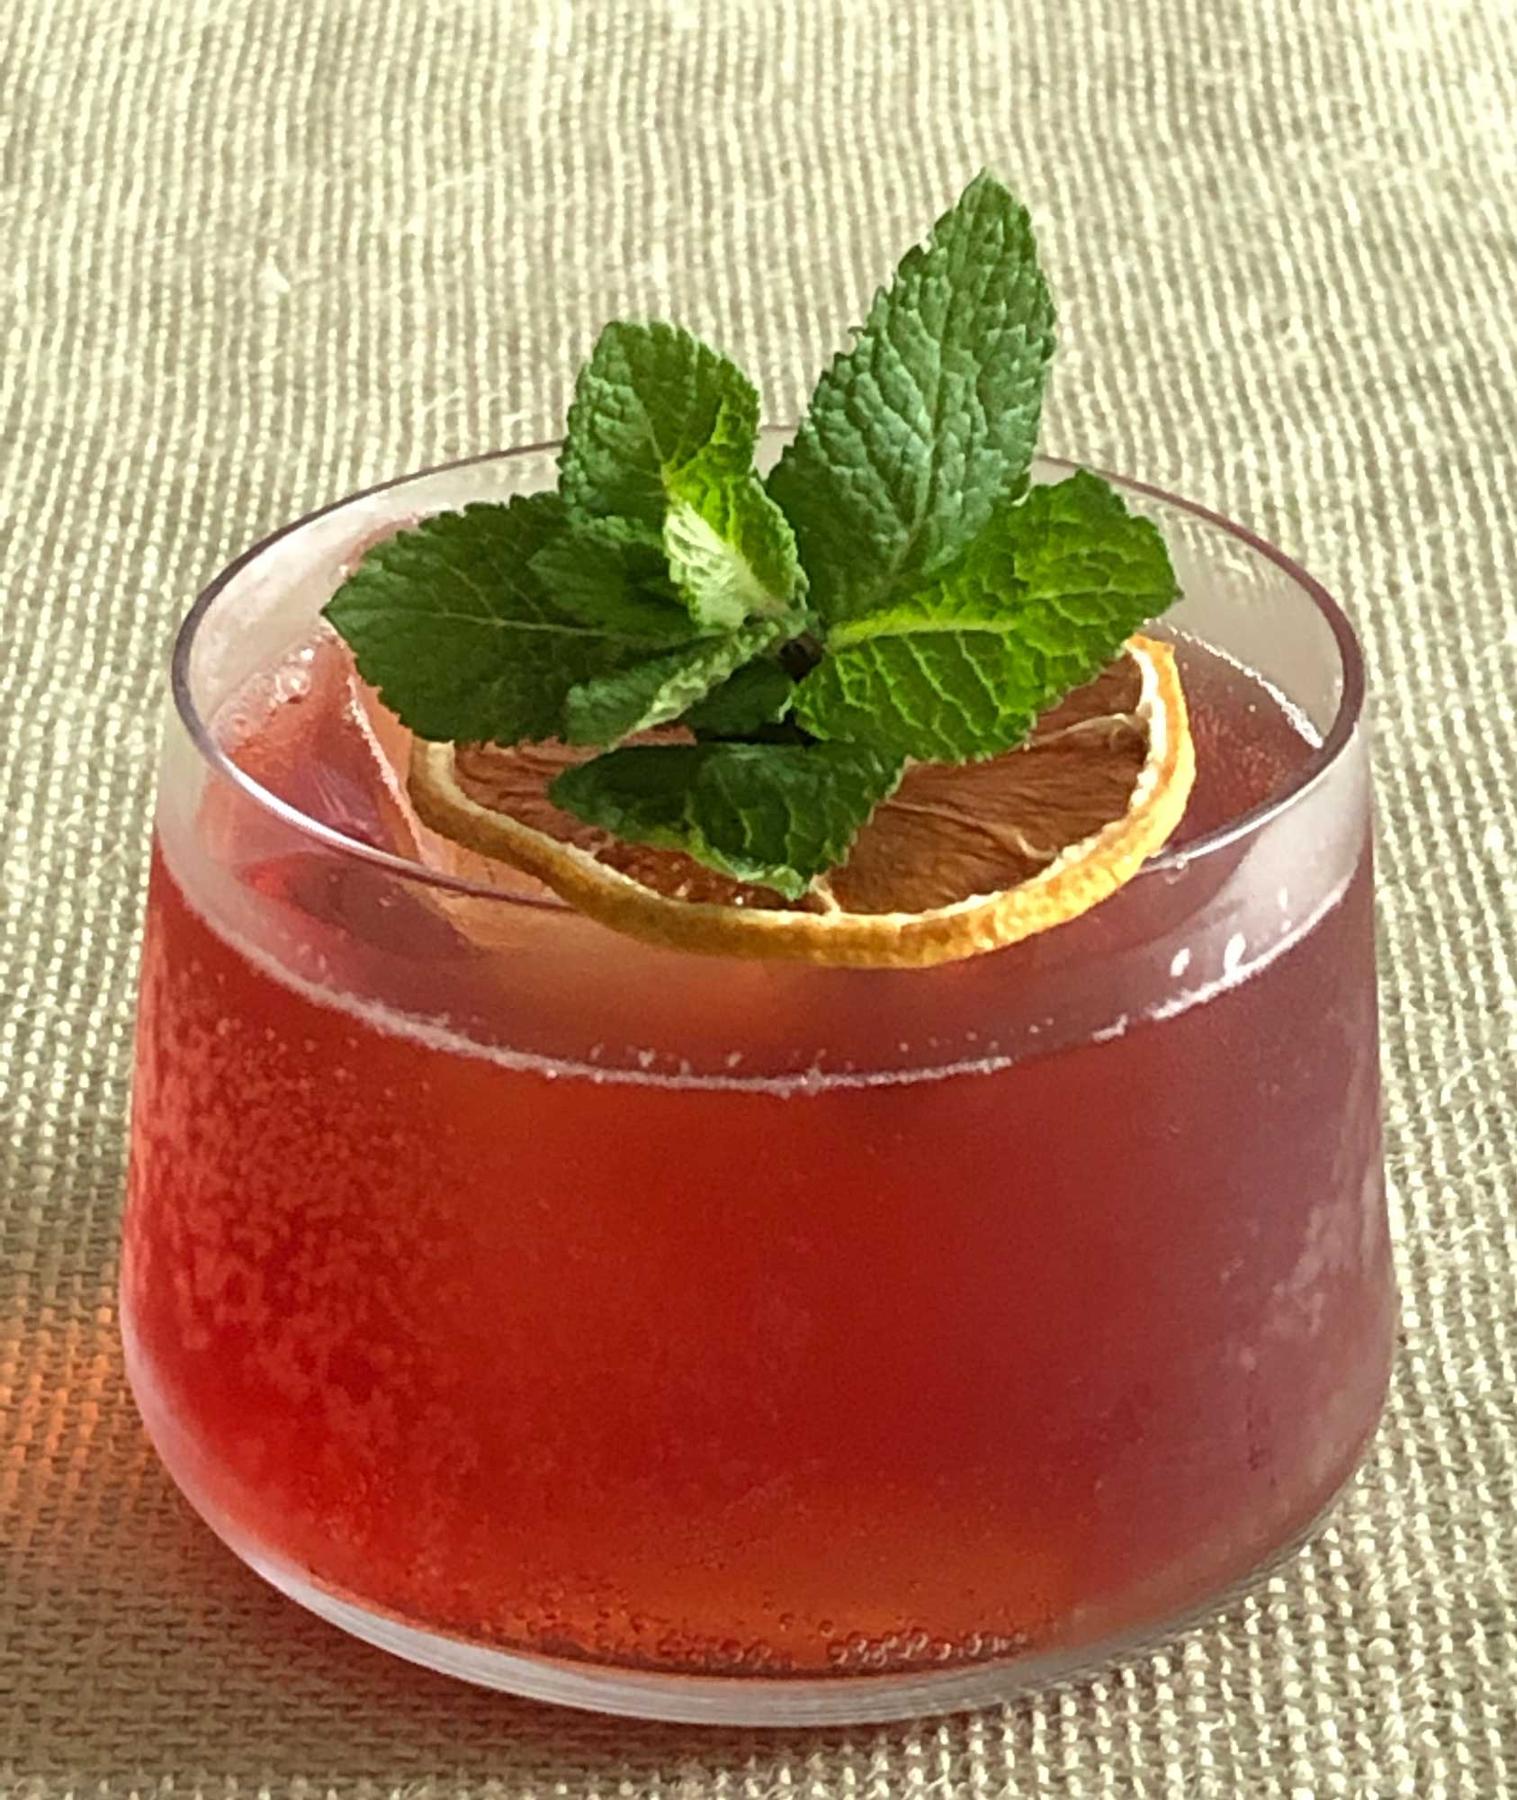 An example of the Byrrh & Tonic, the mixed drink (drink) featuring Byrrh Grand Quinquina, tonic water, sprig of mint, and lemon twist; photo by Lee Edwards